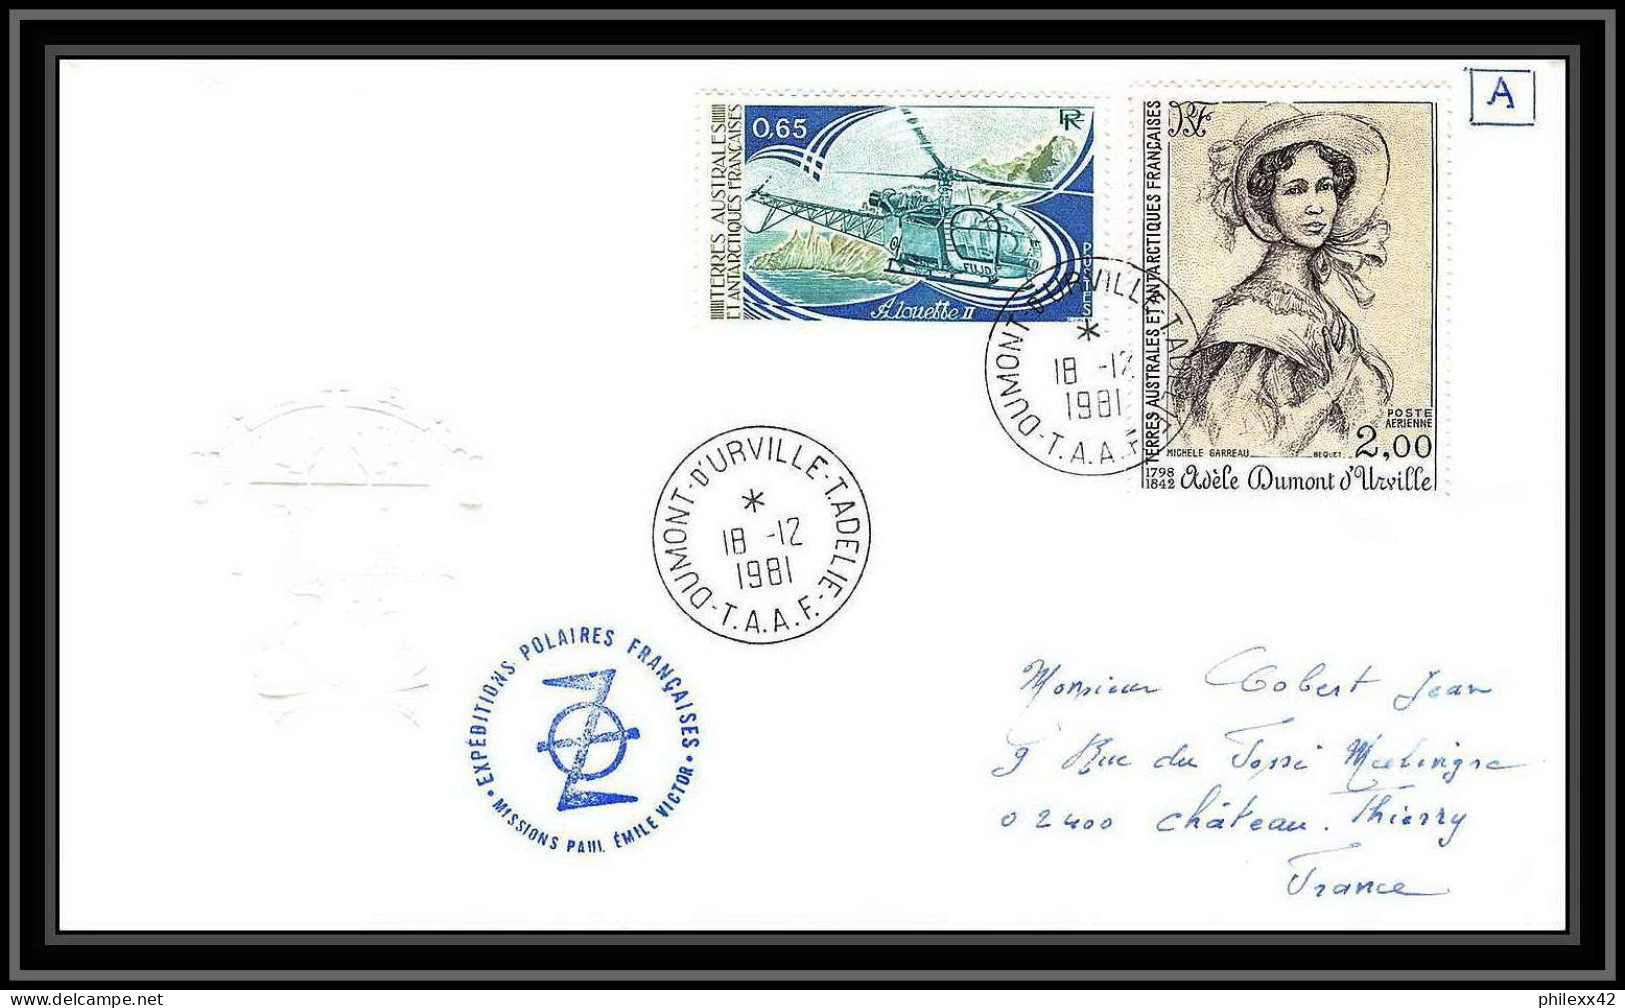 0136 Taaf Terres Australes Antarctic Lettre (cover) 18/12/1981 - Covers & Documents